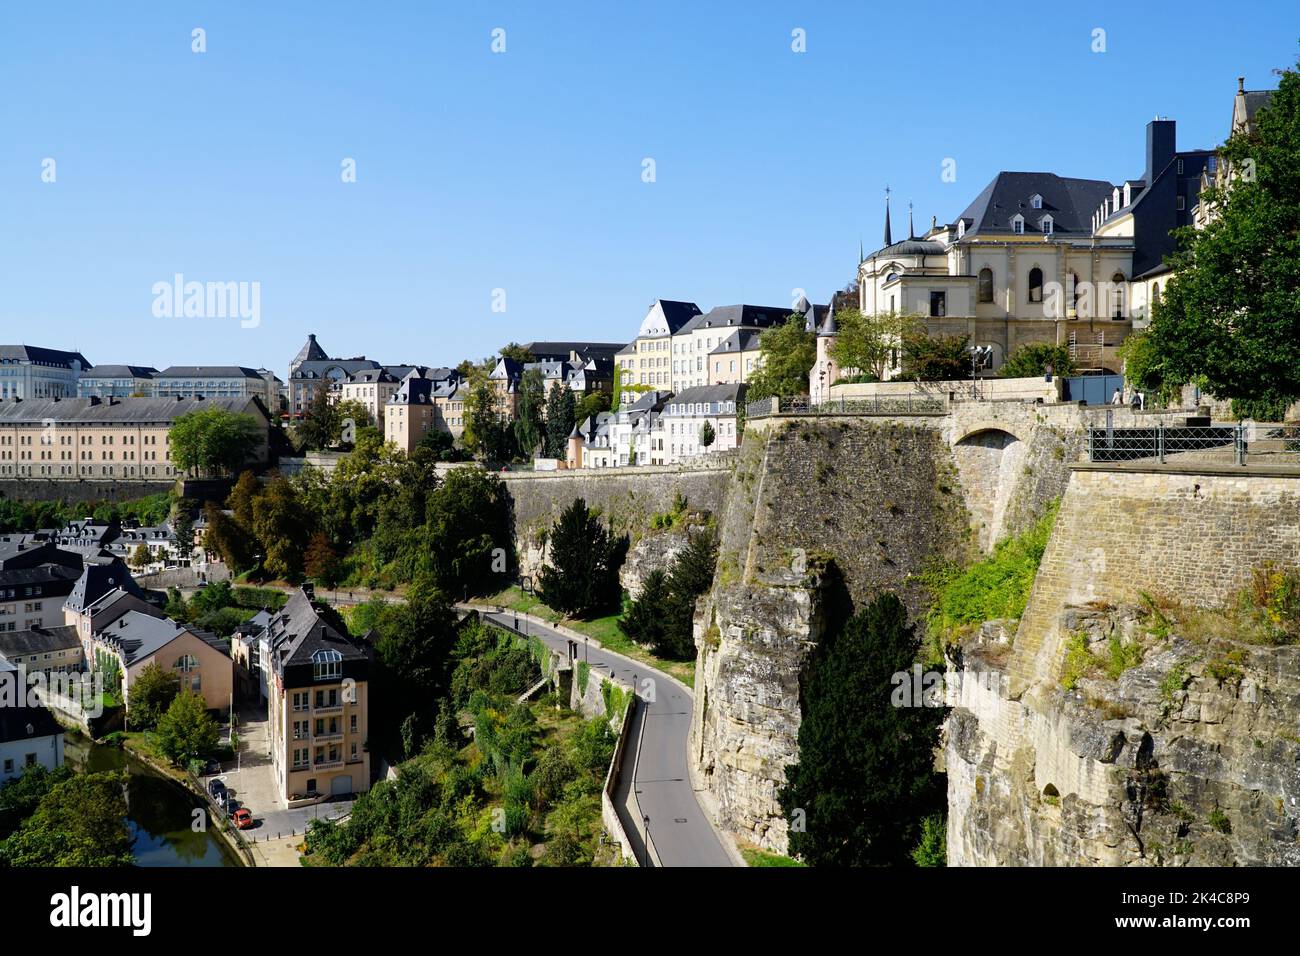 An aerial view of an asphalt road and buildings in Luxembourg in sunny weather Stock Photo